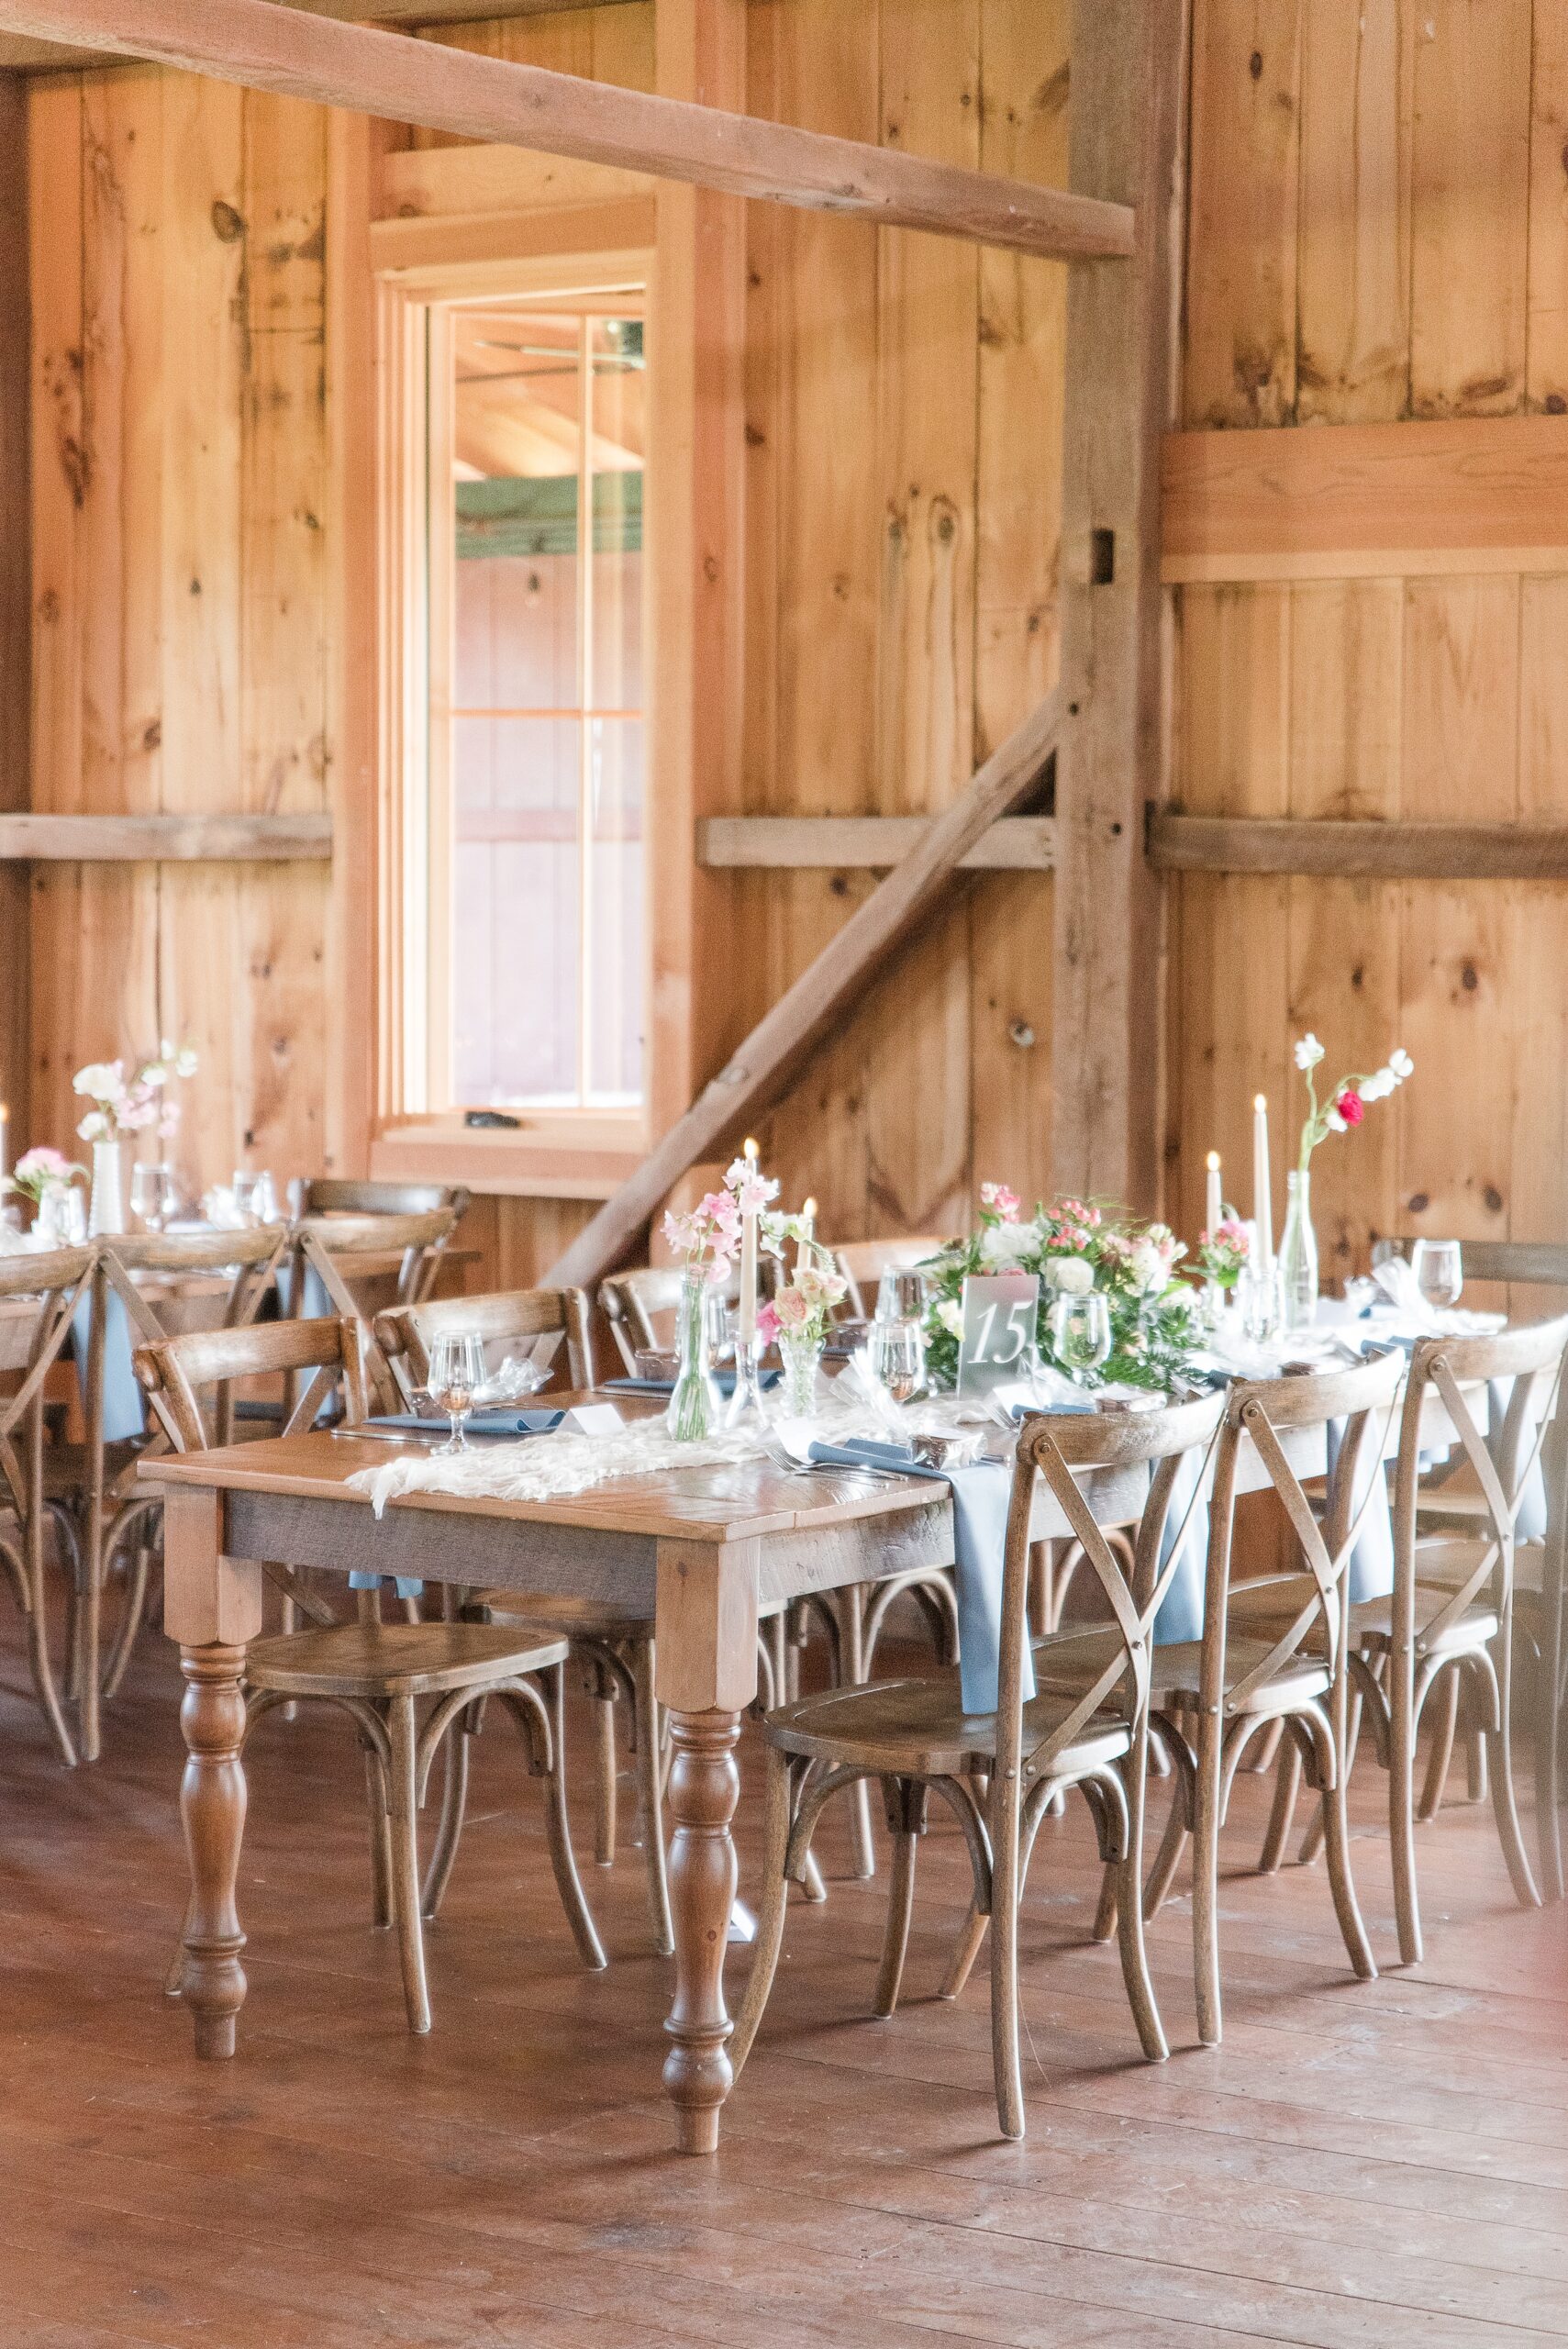 A view of a wooden table wedding reception set up at the Bluebird Manor wedding venue